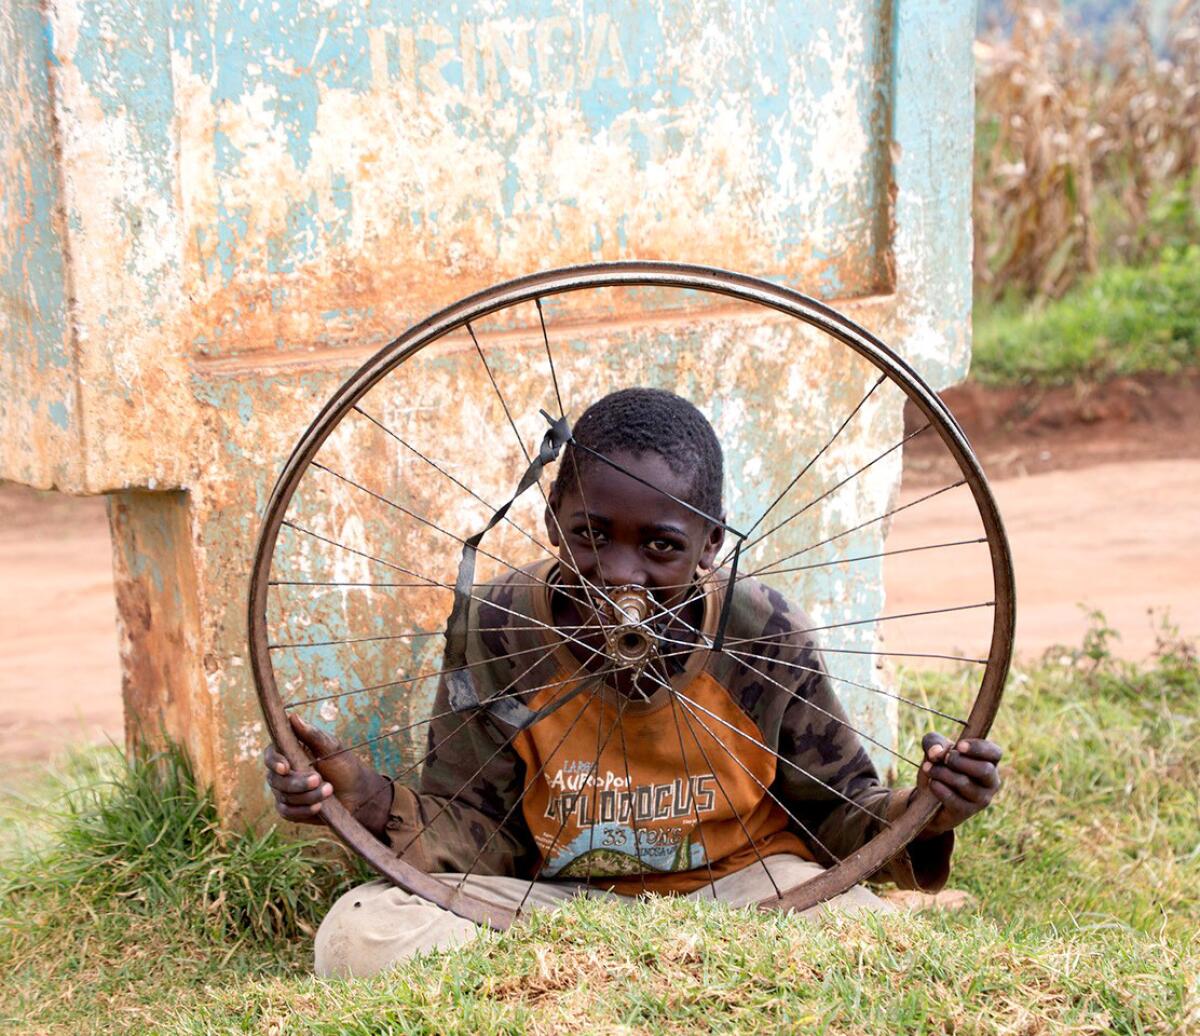 Tanzania | Candice Francis, EscondidoFrancis was in Tanzania when she met this boy in a rural village. “His English was a little bit better than my Swahili,” Francis said. She caught this image with a Canon 6D.